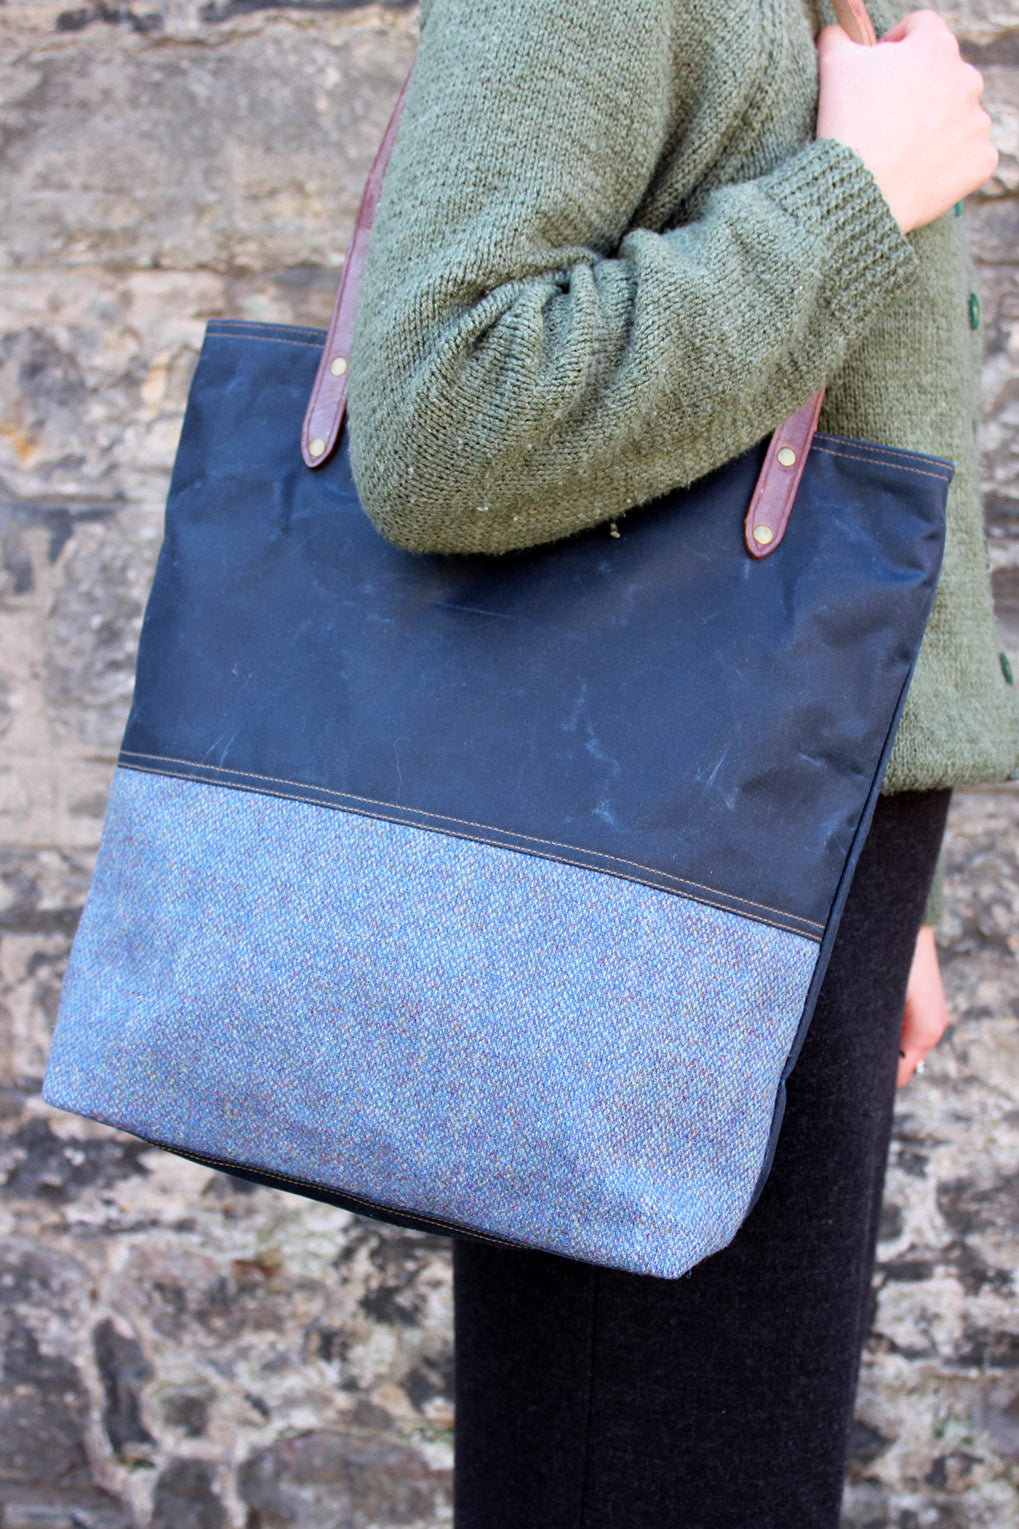 Scottish Textiles Showcase and Fernweh tote bag collaboration in waxed cotton and Harris Tweed. Sky blue with brown leather straps.